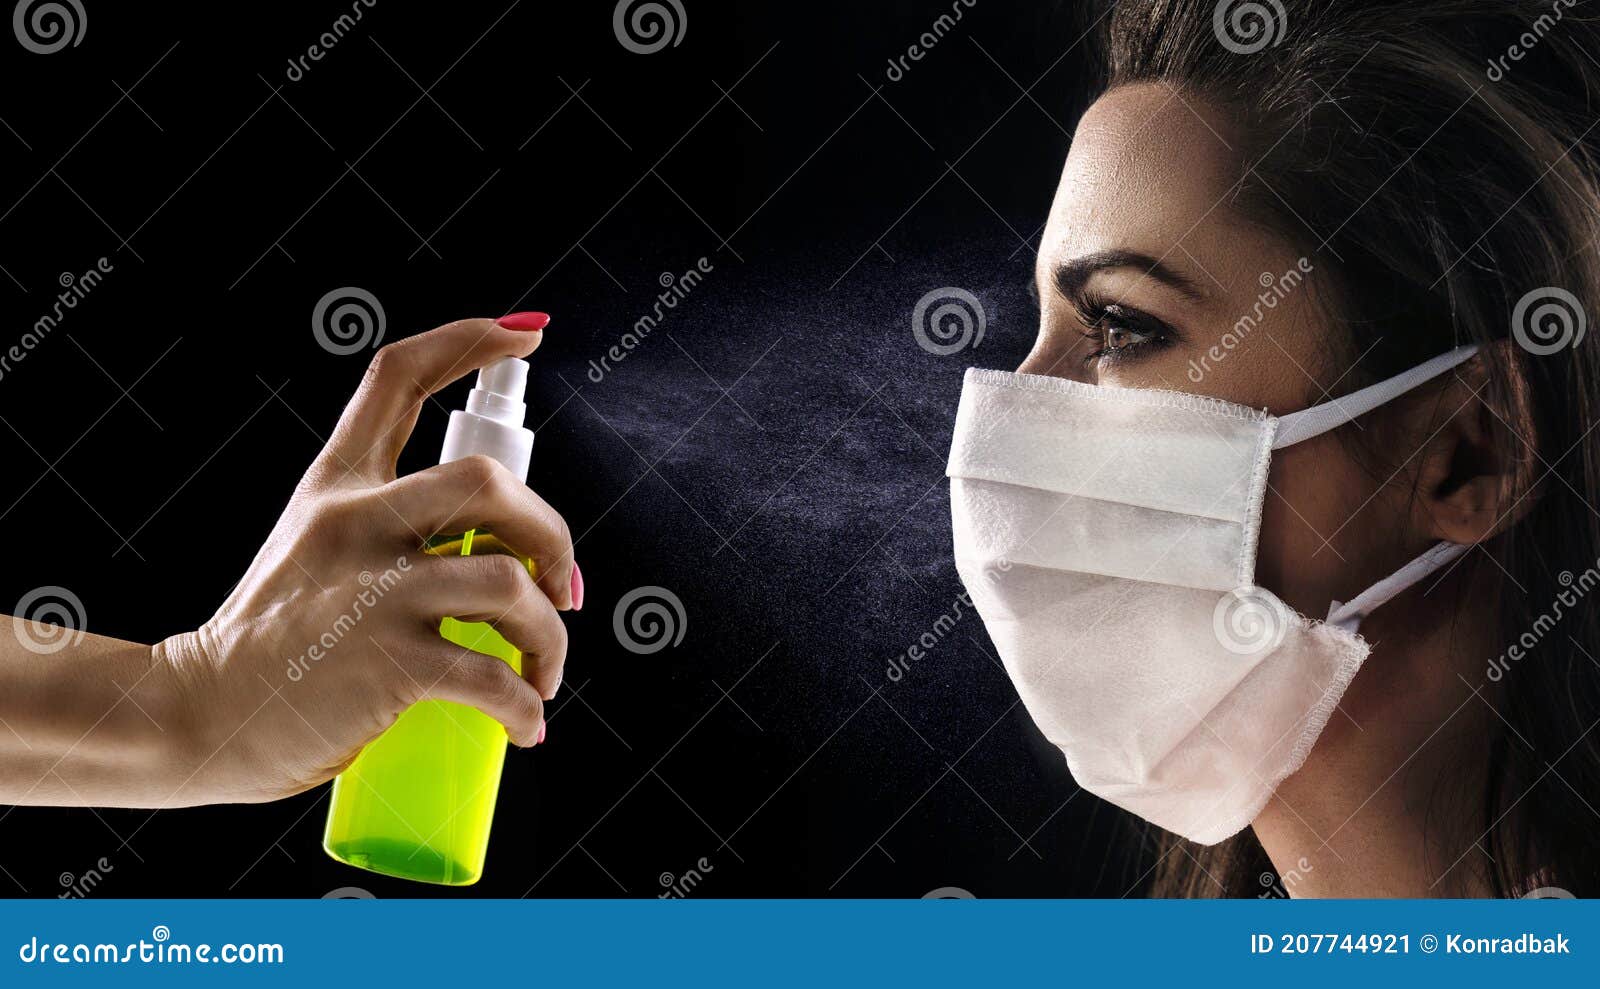 conceptual portrait of a woman wearing hygienic mask and looking at the antibacterial spray